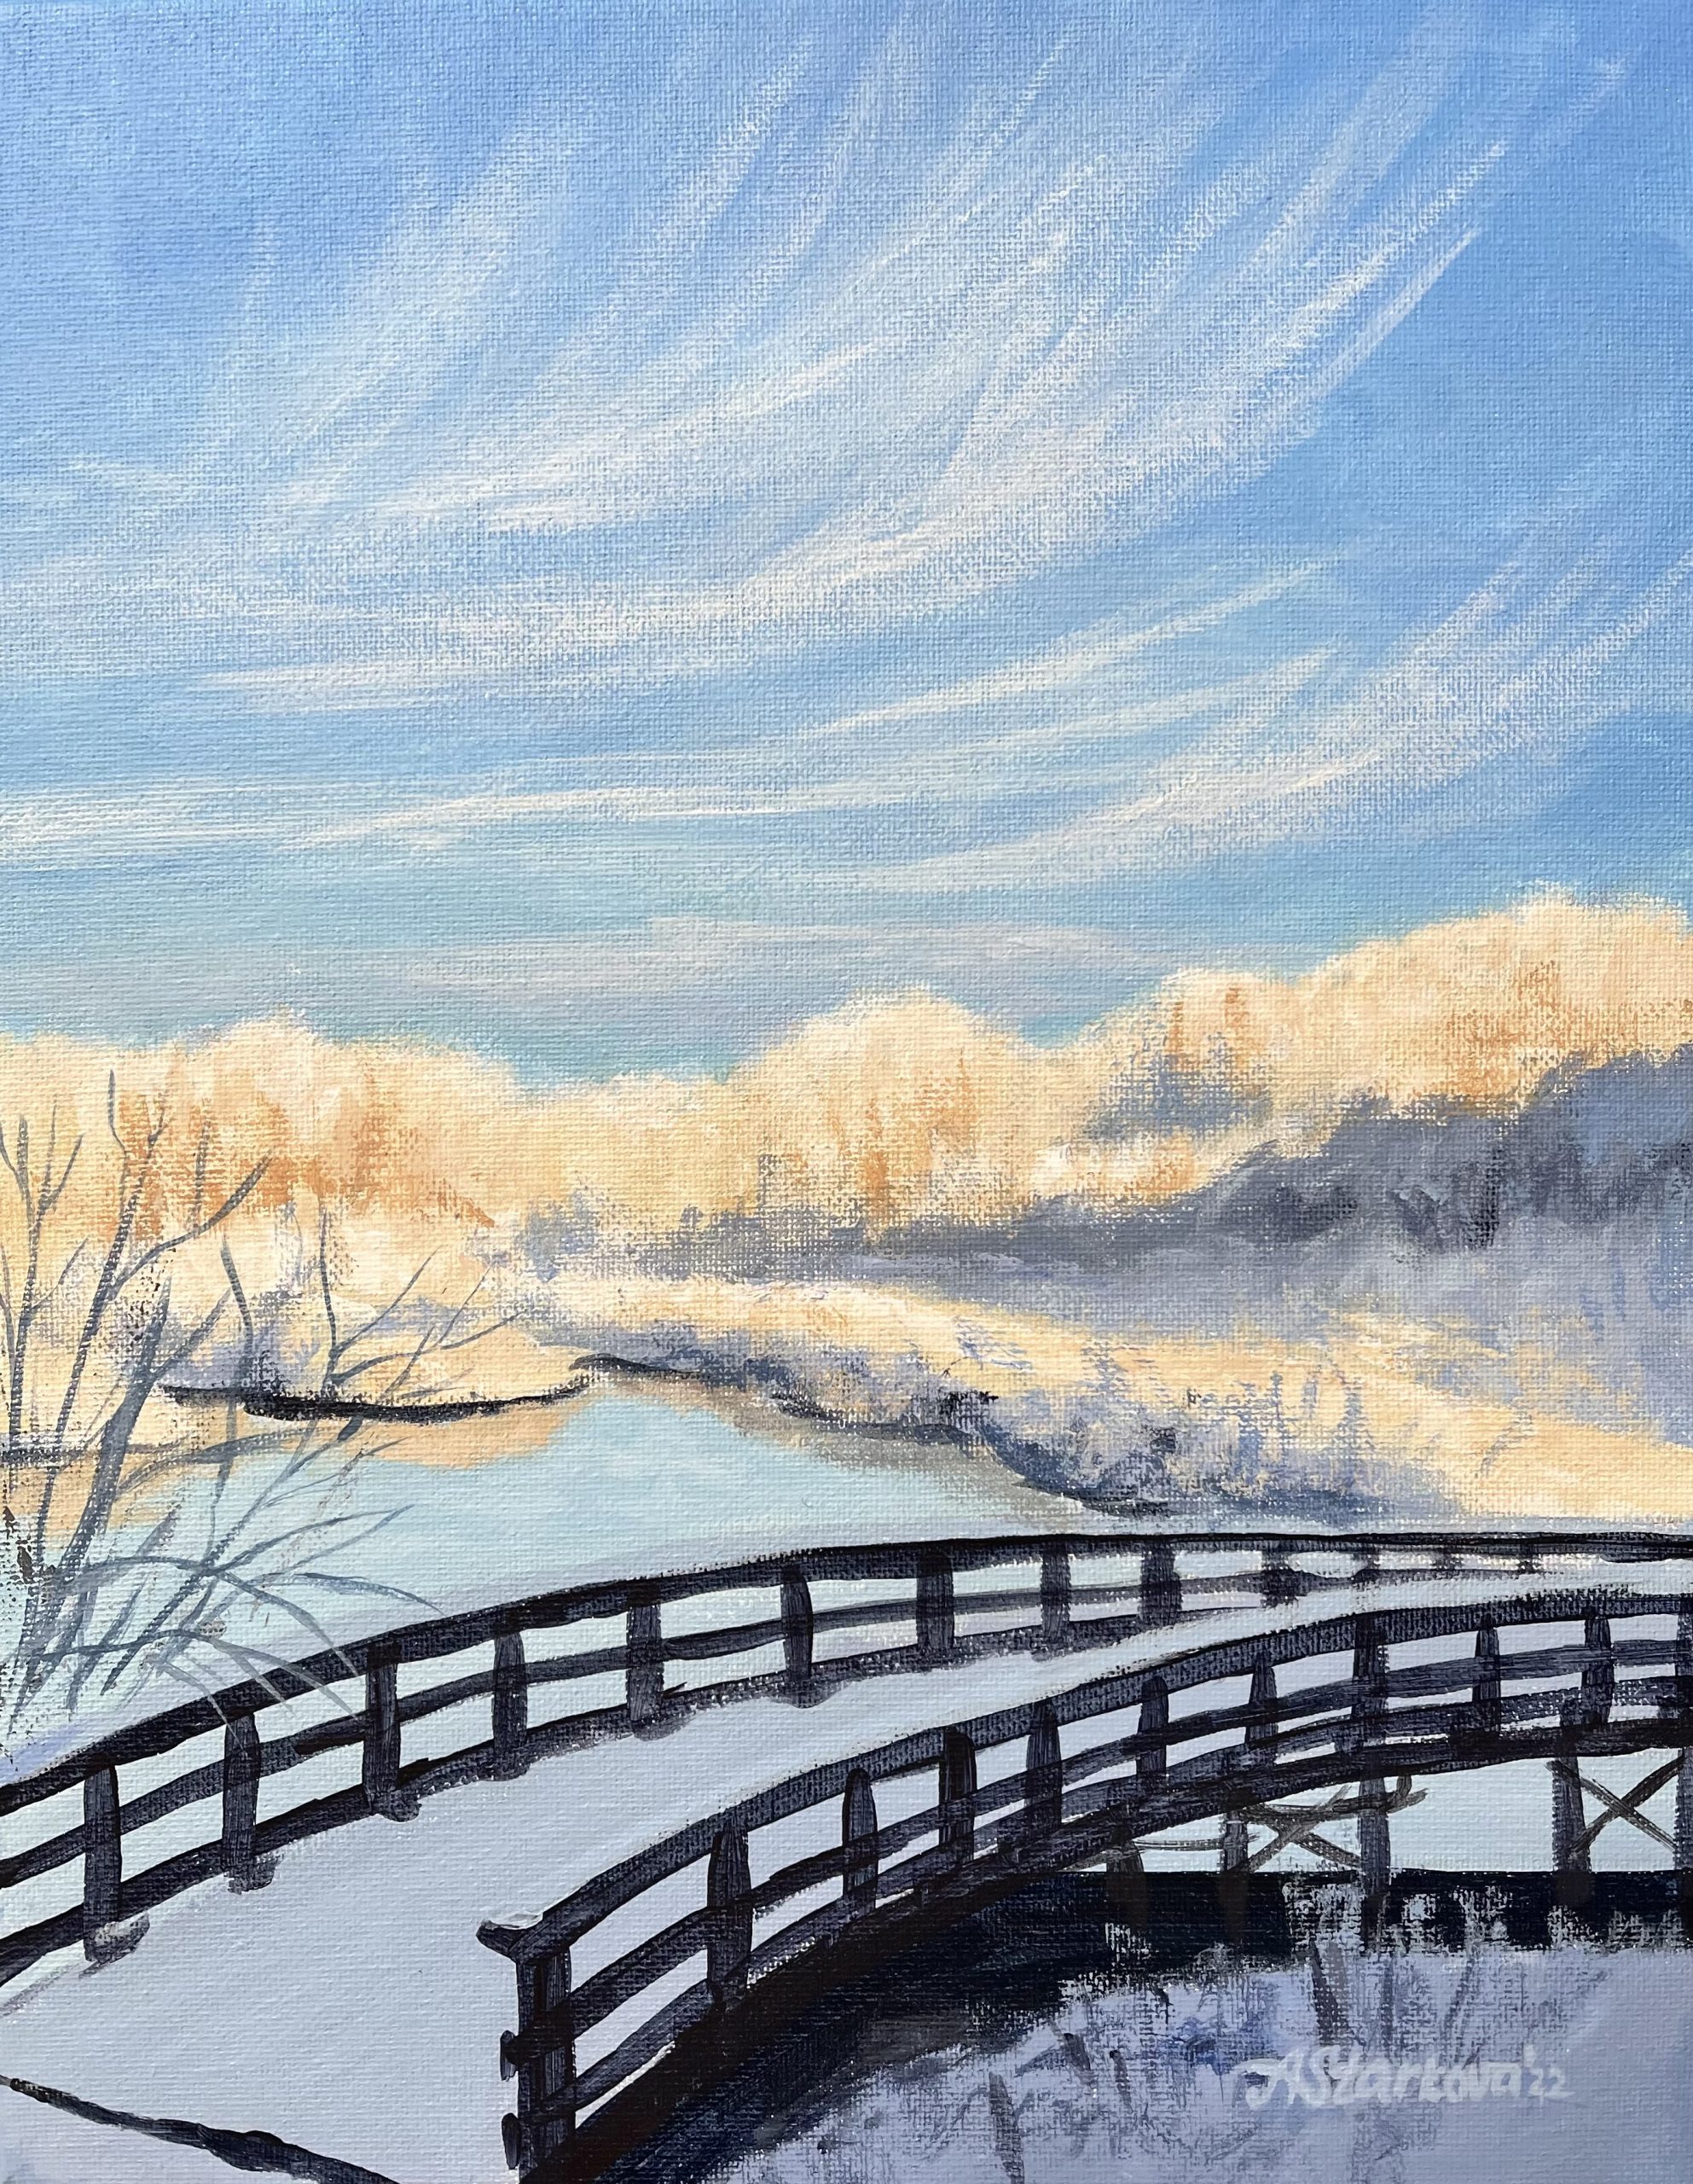 "Winter afternoon"